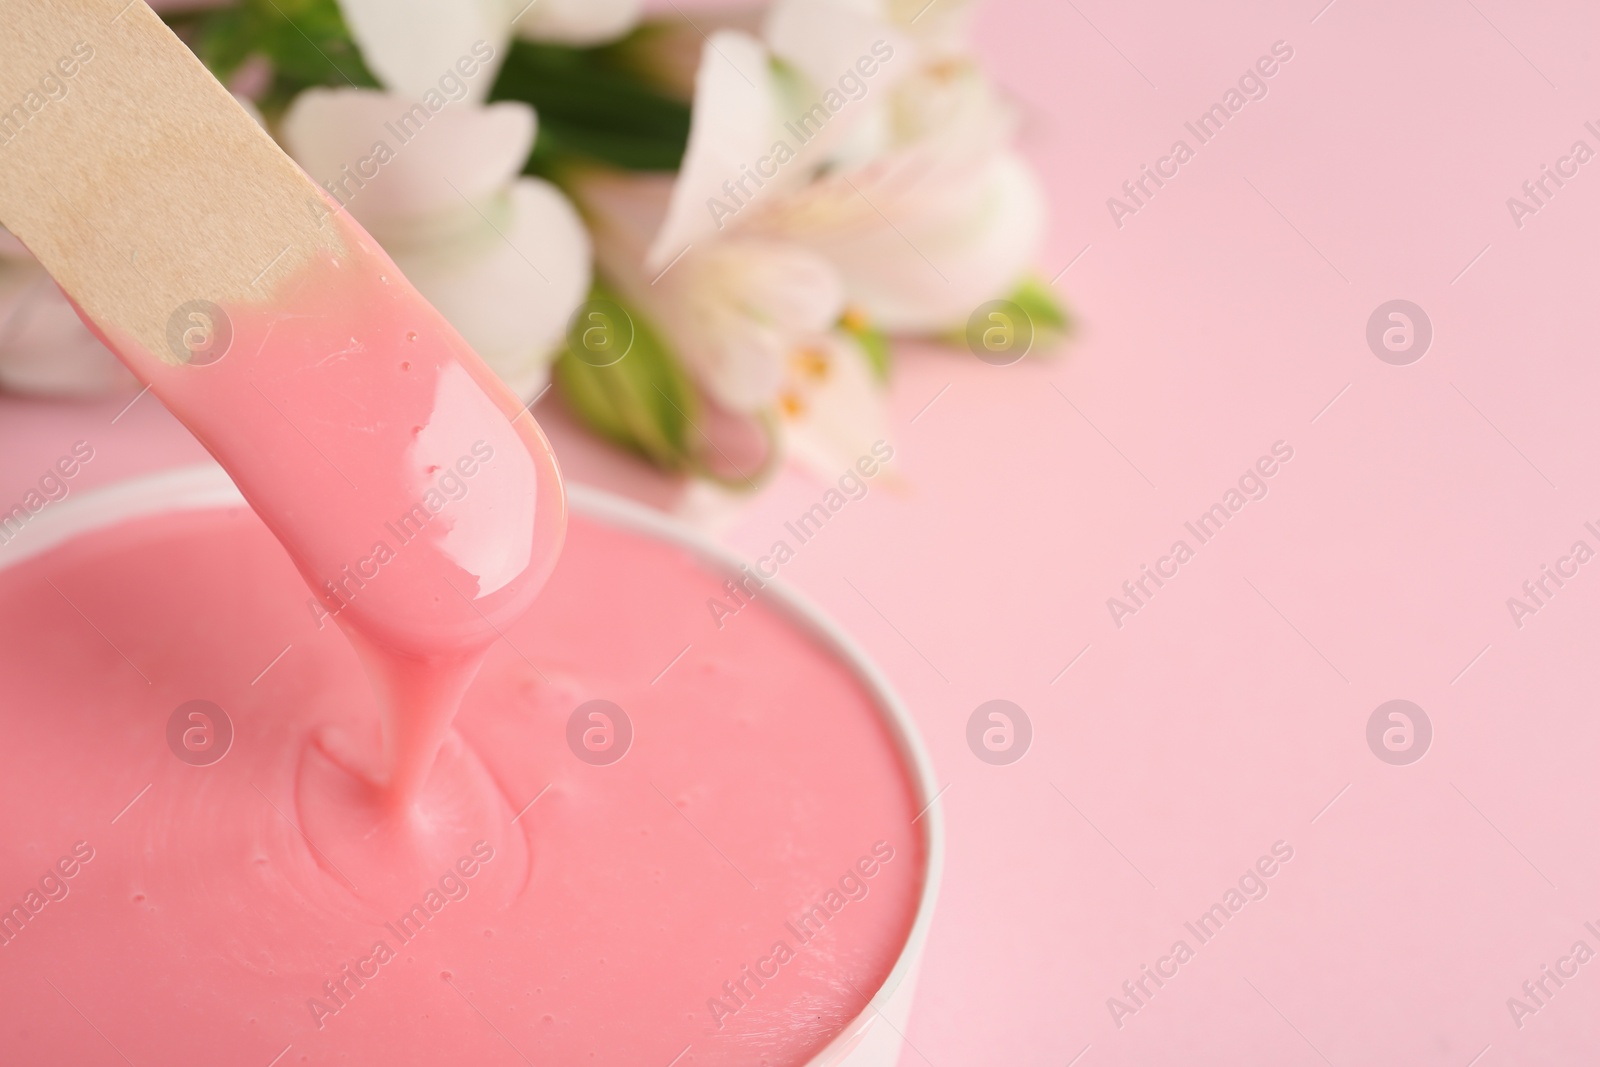 Photo of Wooden spatula and hot depilatory wax on light pink background, closeup. Space for text